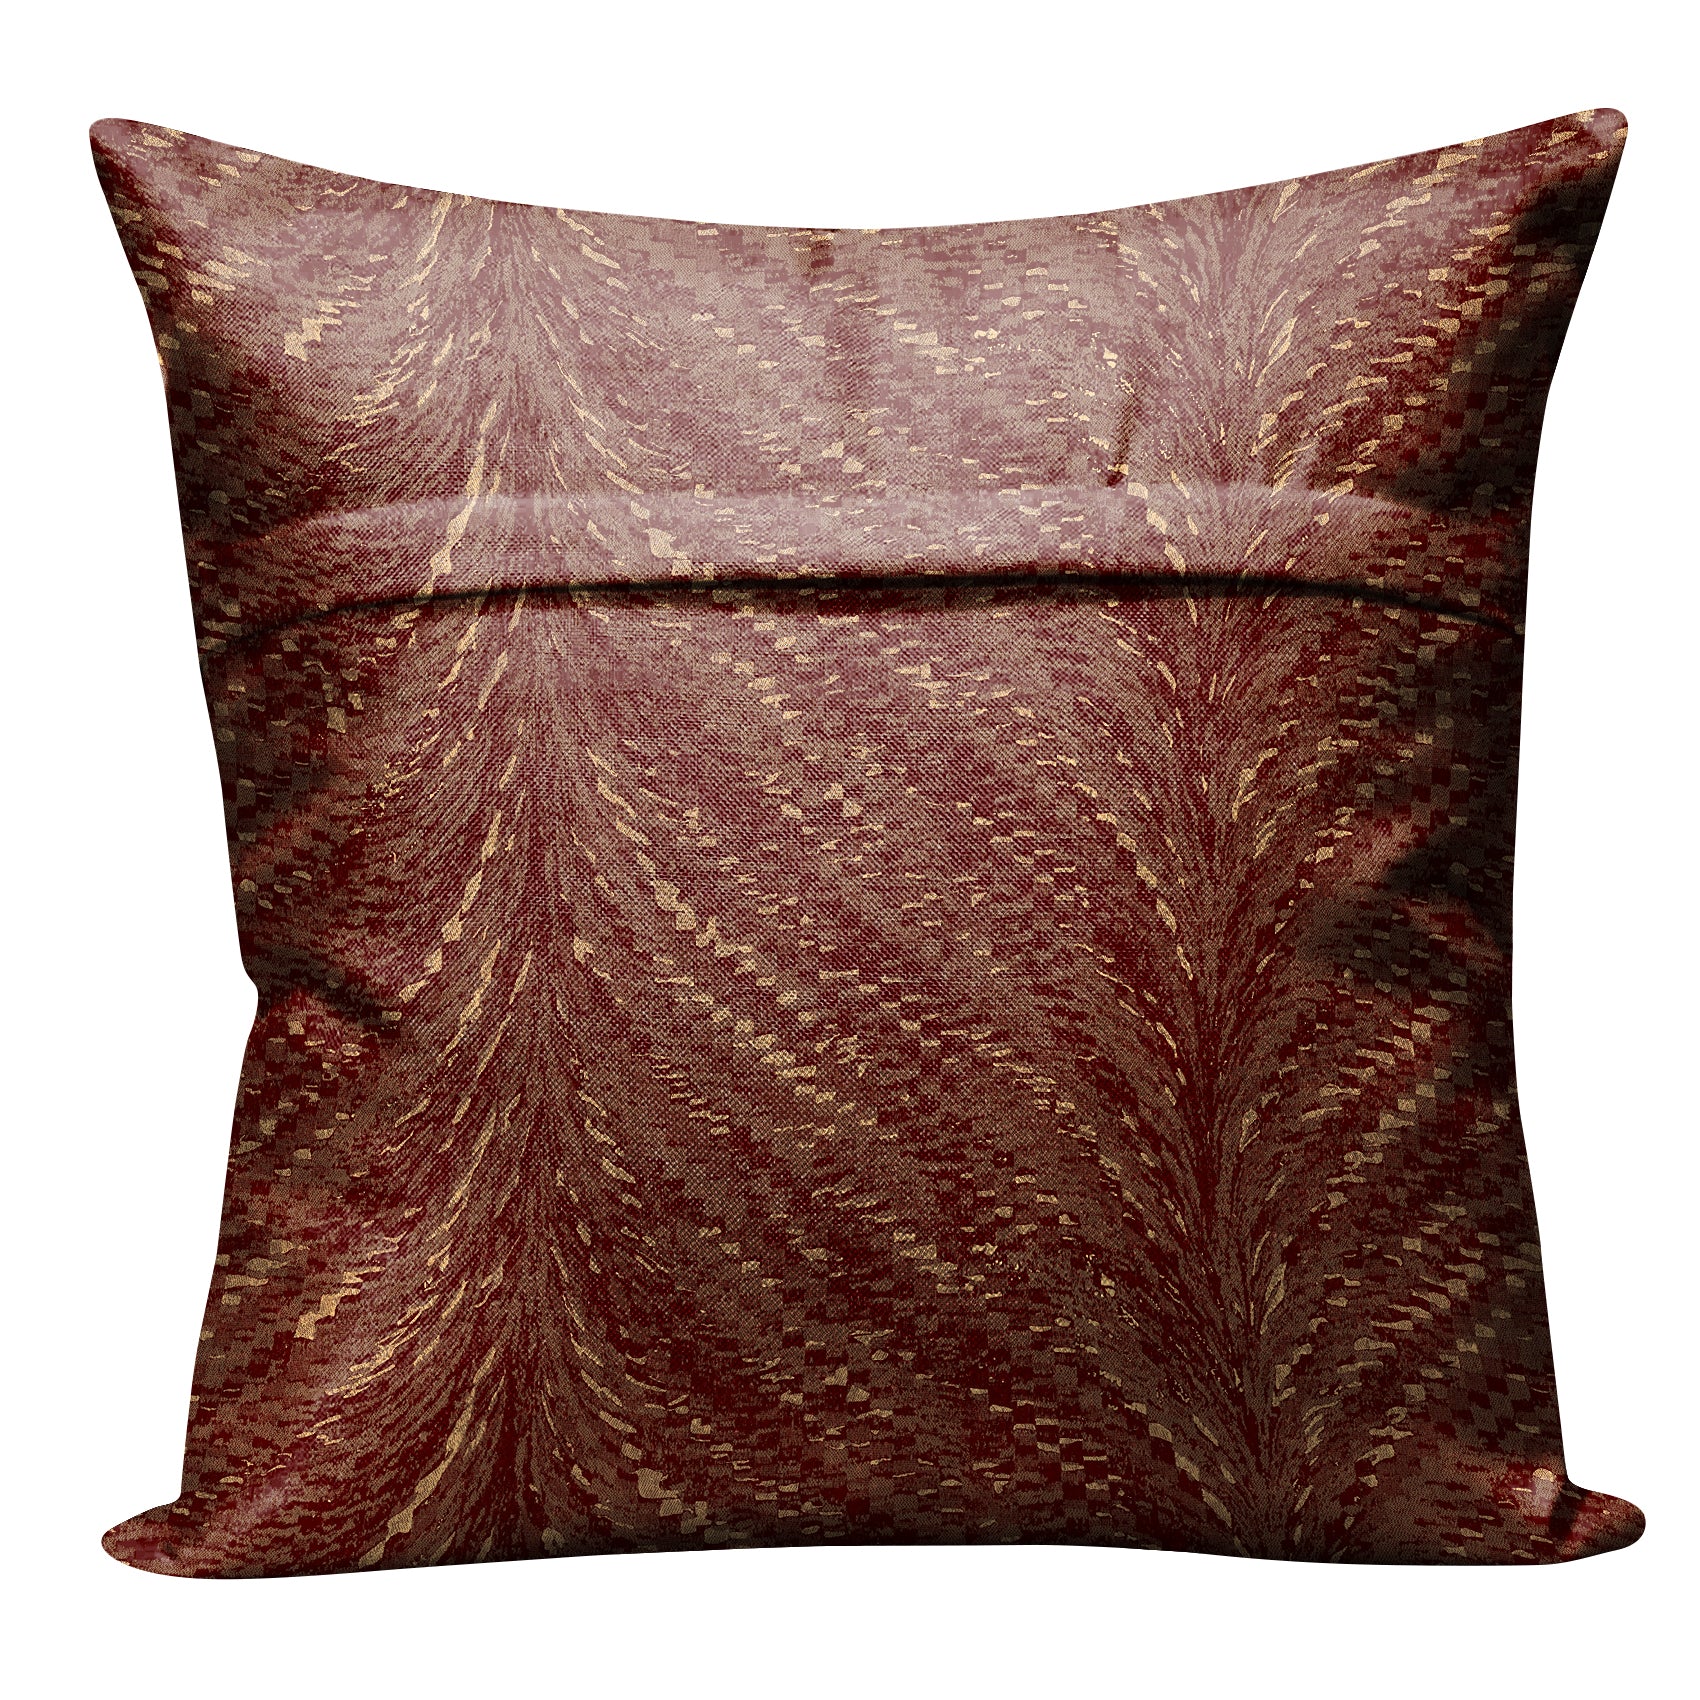 LUXOR ROSSO (16X16 INCH) DIGITAL PRINTED CUSHION COVER